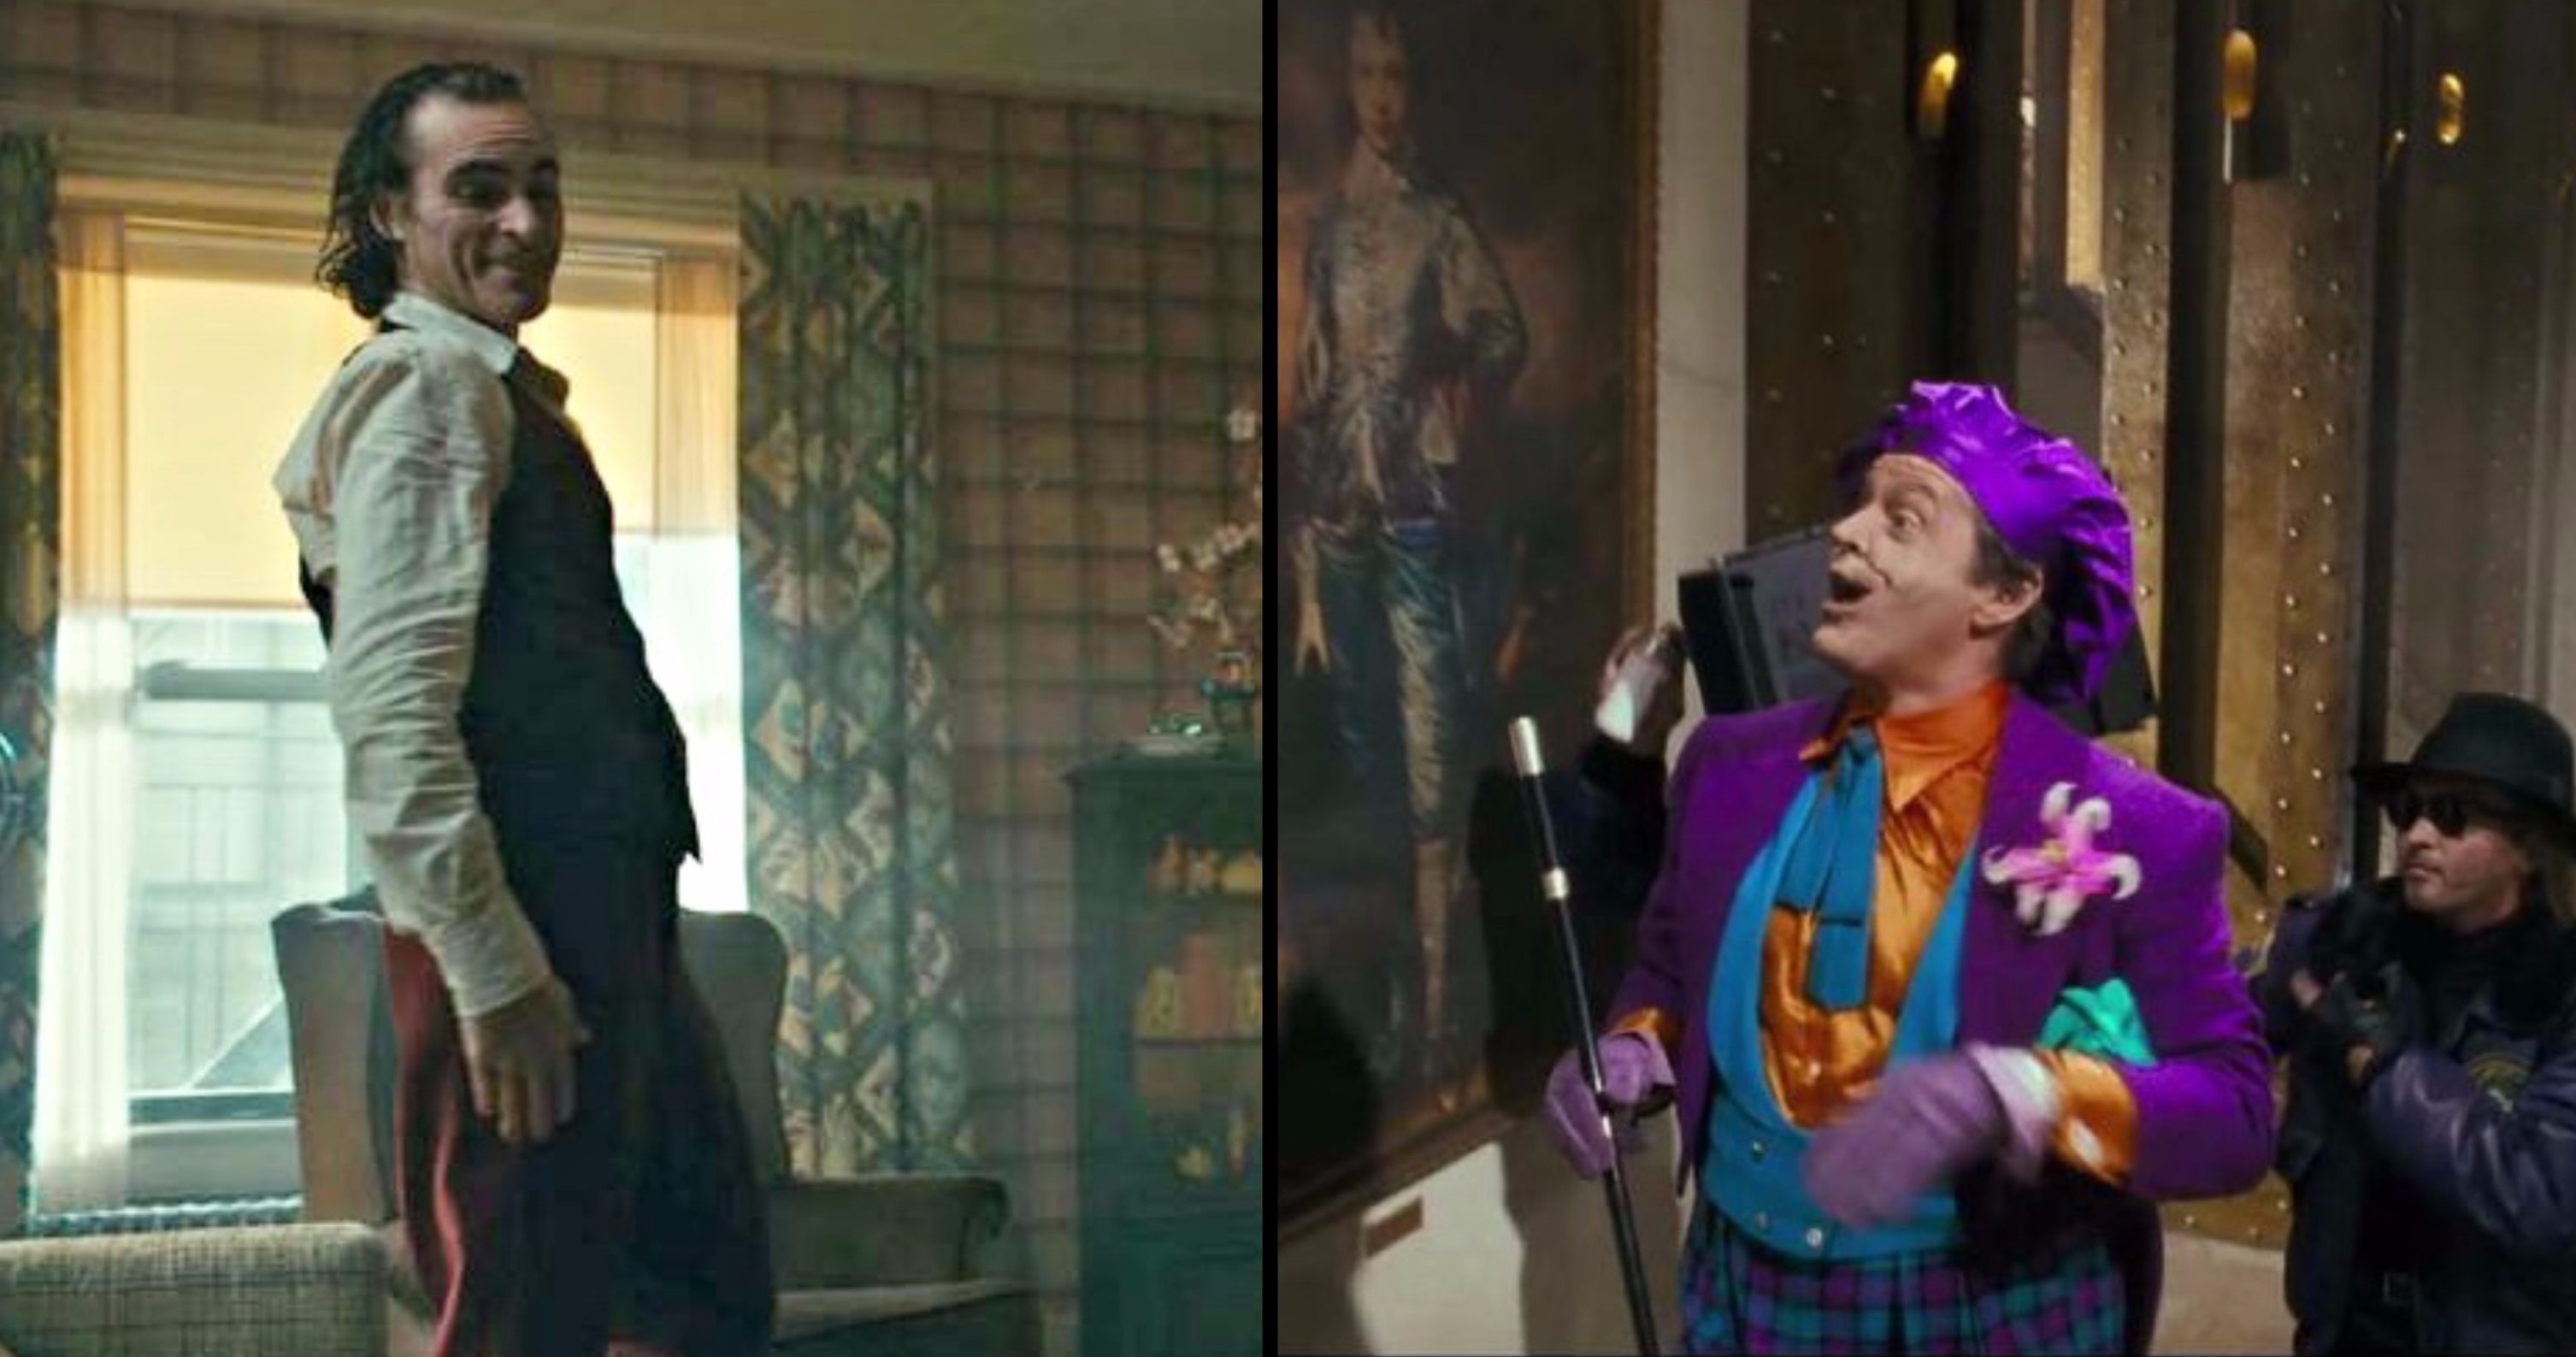 Easy-To-Miss Joker Easter Egg Pays Clever Tribute to Tim Burton's Batman